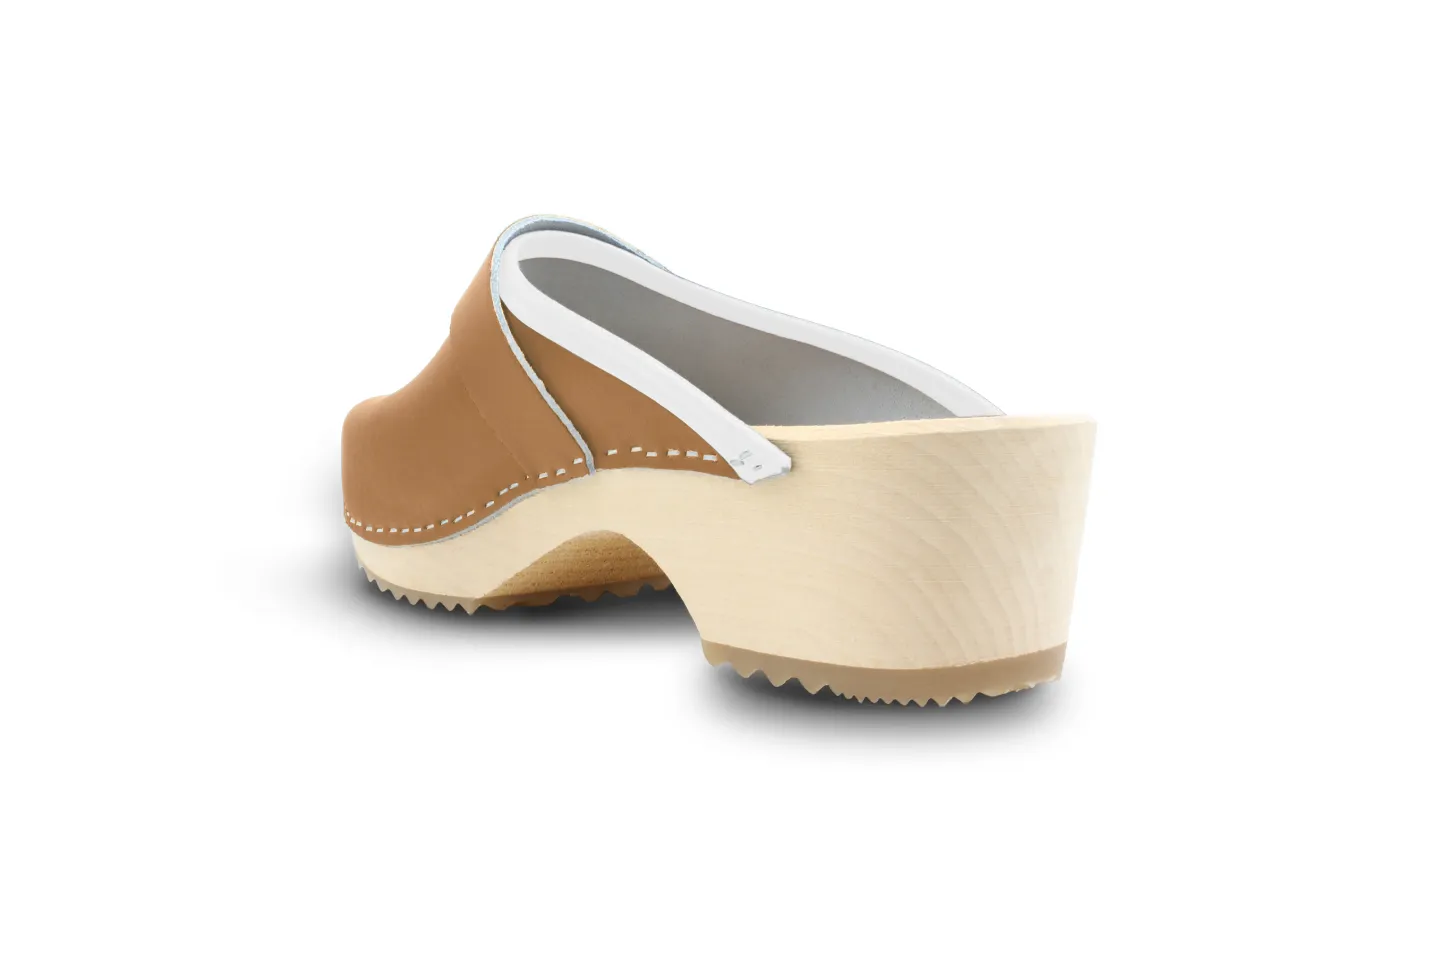 Holz Clogs in Beige, offen